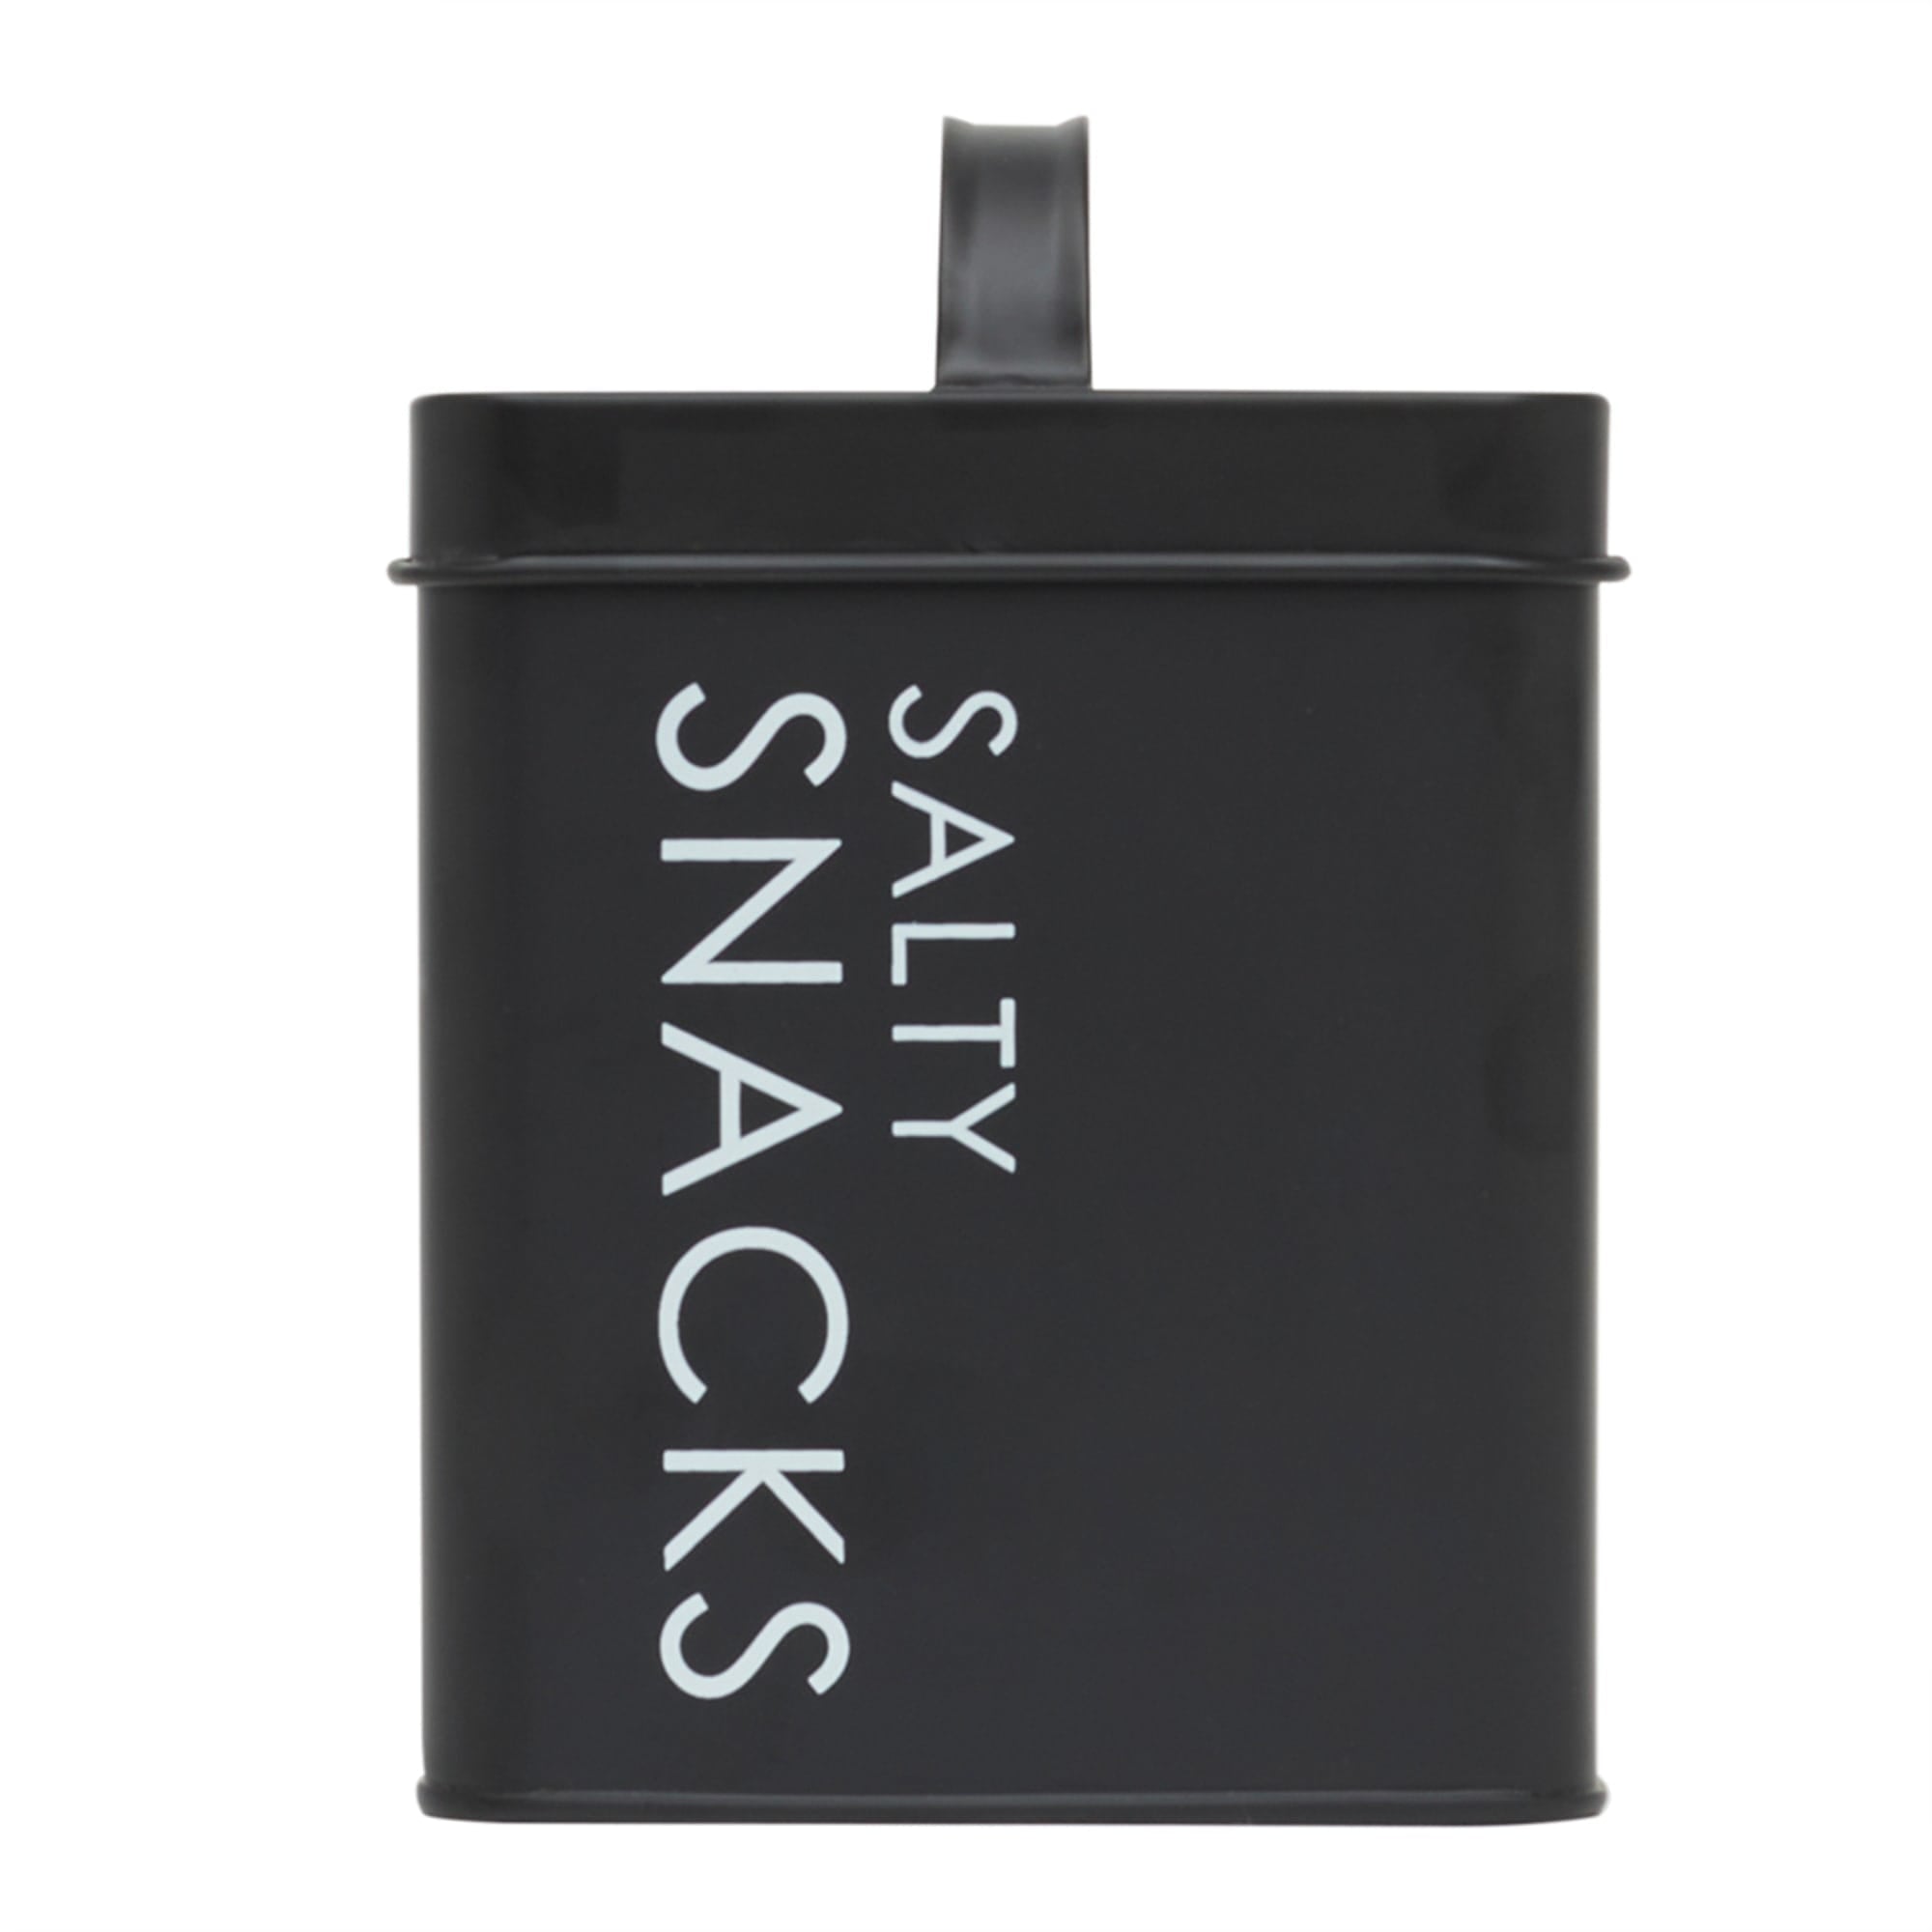 Home Basics Salty Snacks Tin Canister $3.00 EACH, CASE PACK OF 12